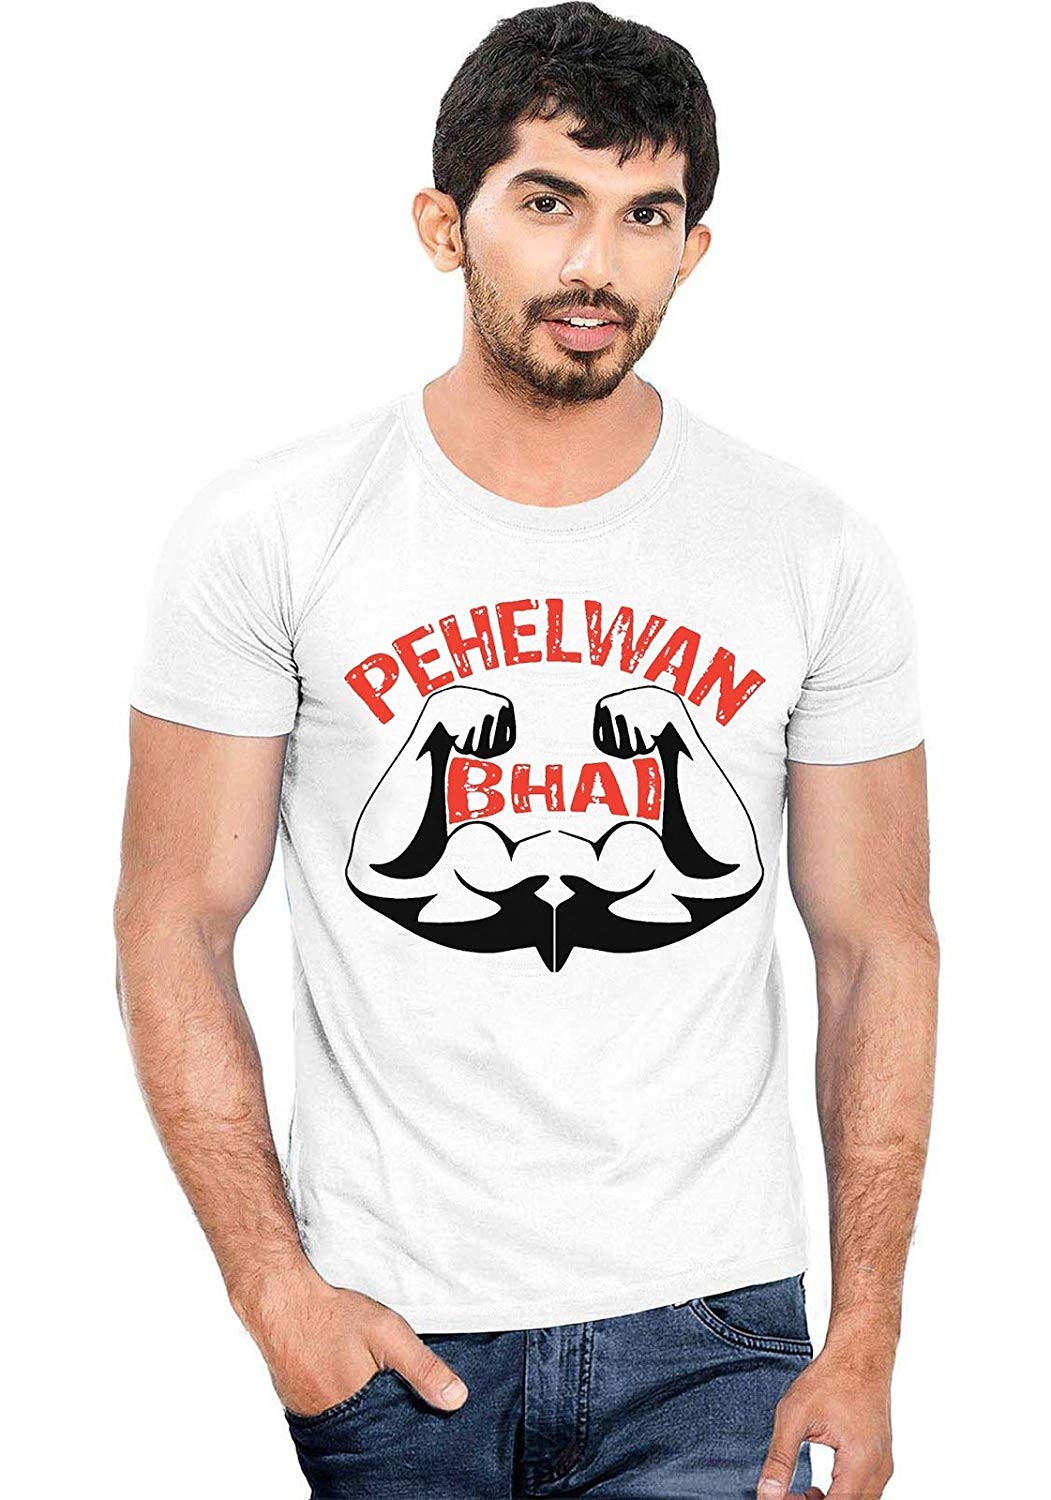 DOUBLE F ROUND NECK HALF SLEEVE WHITE COLOR NEW PAHELWAN BHAI PRINTED T-SHIRT FOR MEN